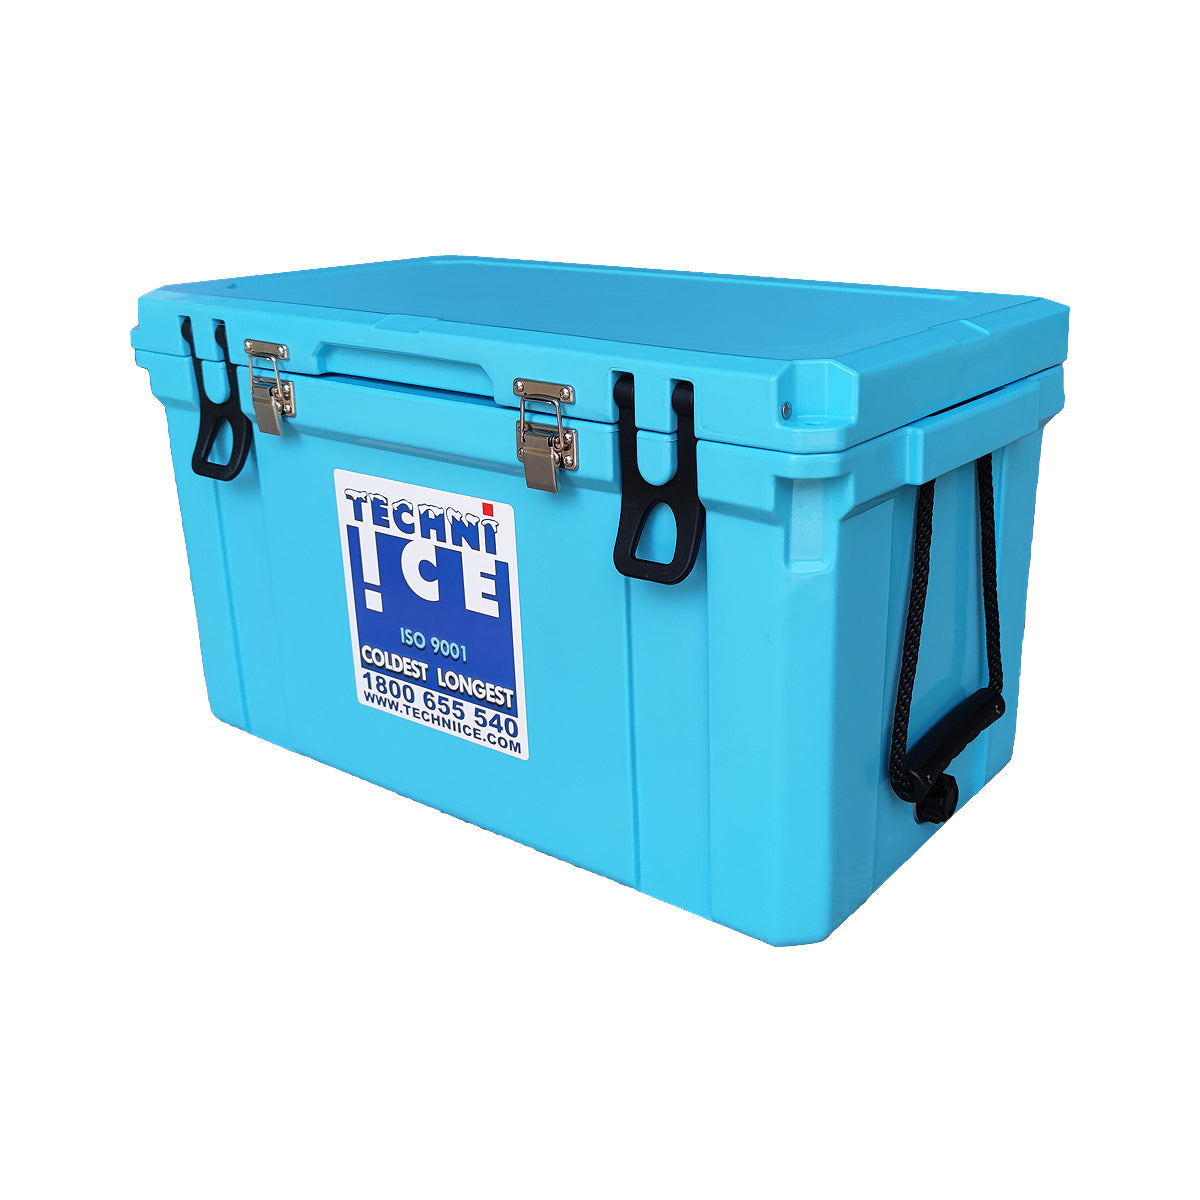 Classic Hardcore Icebox 55L Light Blue *PREORDER FOR JULY DISPATCH *FREE 6 REUSABLE DRY ICE PACKS VALUES $32.95